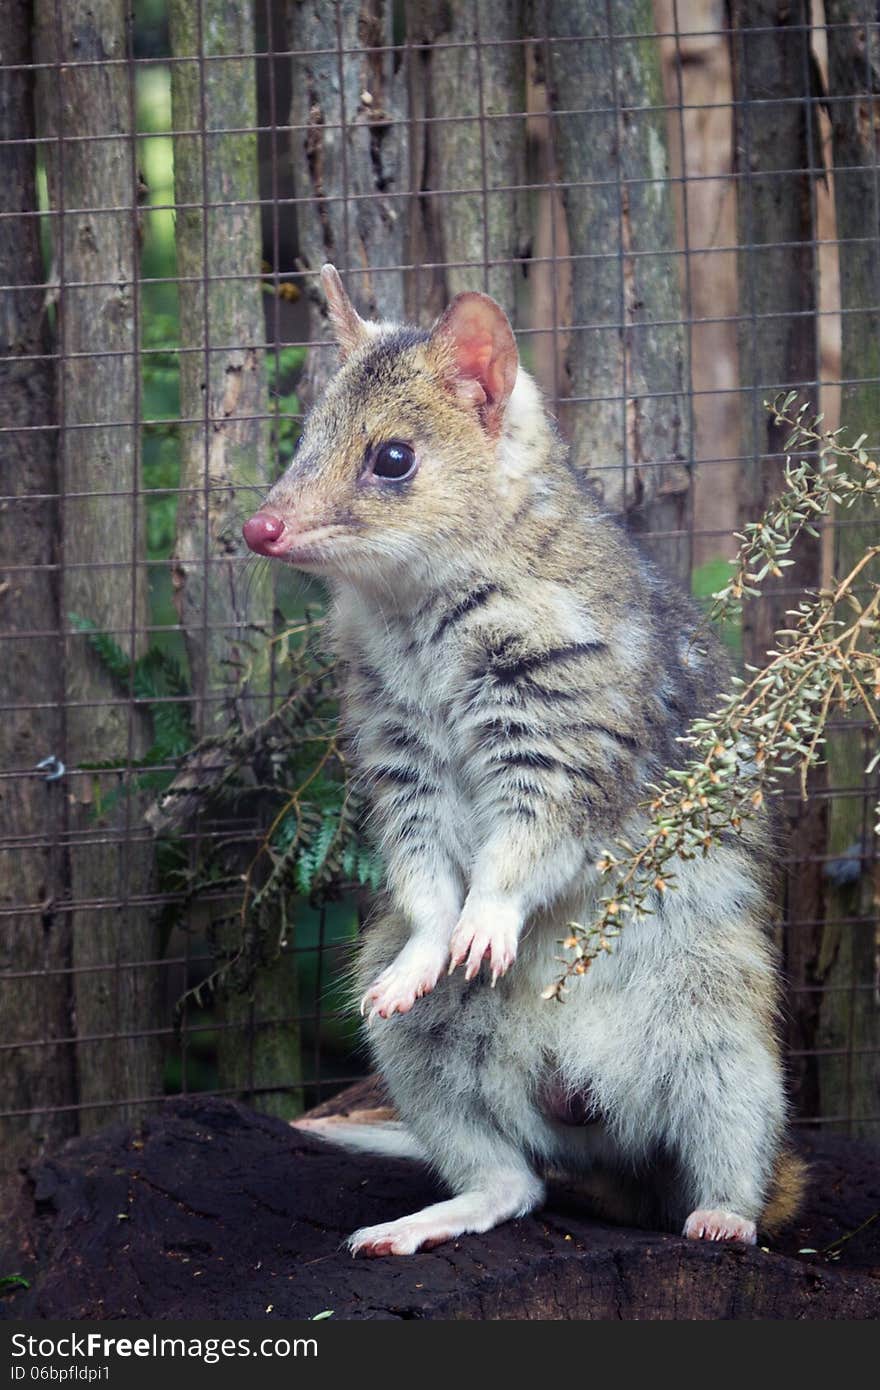 A small Australian marsupial, the Eastern Spotted Quoll.